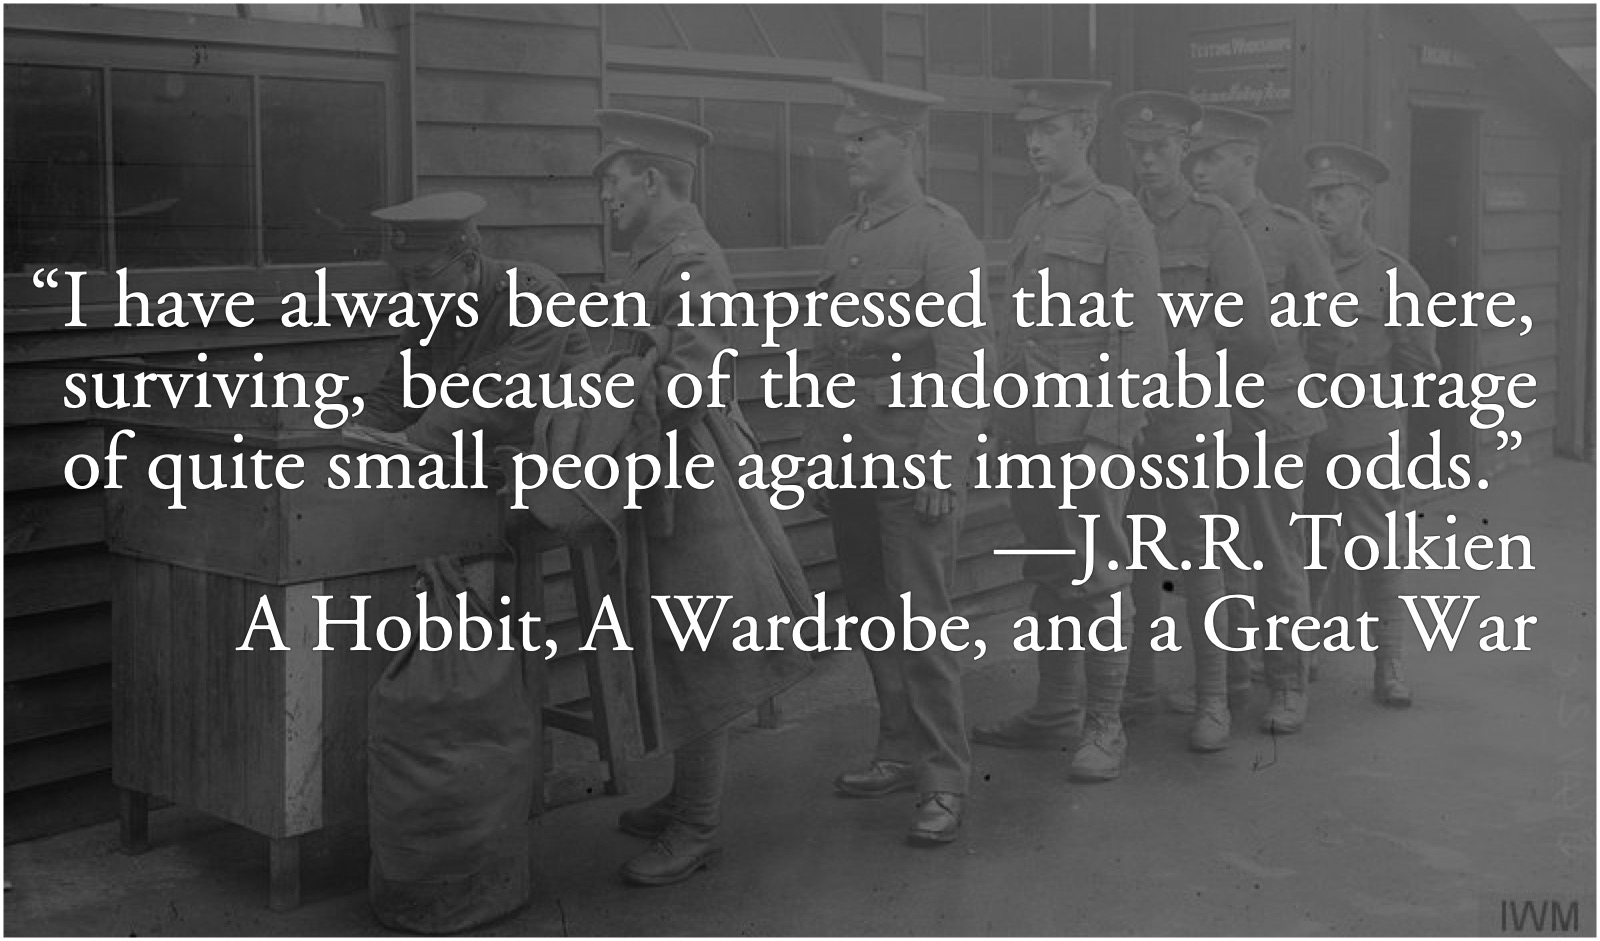 Tolkien: indomitable courage of small men: J.R.R. Tolkien: “I have always been impressed that we are here, surviving, because of the indomitable courage of quite small people against impossible odds.” as quoted in A Hobbit, A Wardrobe, and a Great War.; J. R. R. Tolkien; courage; bravery; World War I; The Great War; persistence; determination, perseverance